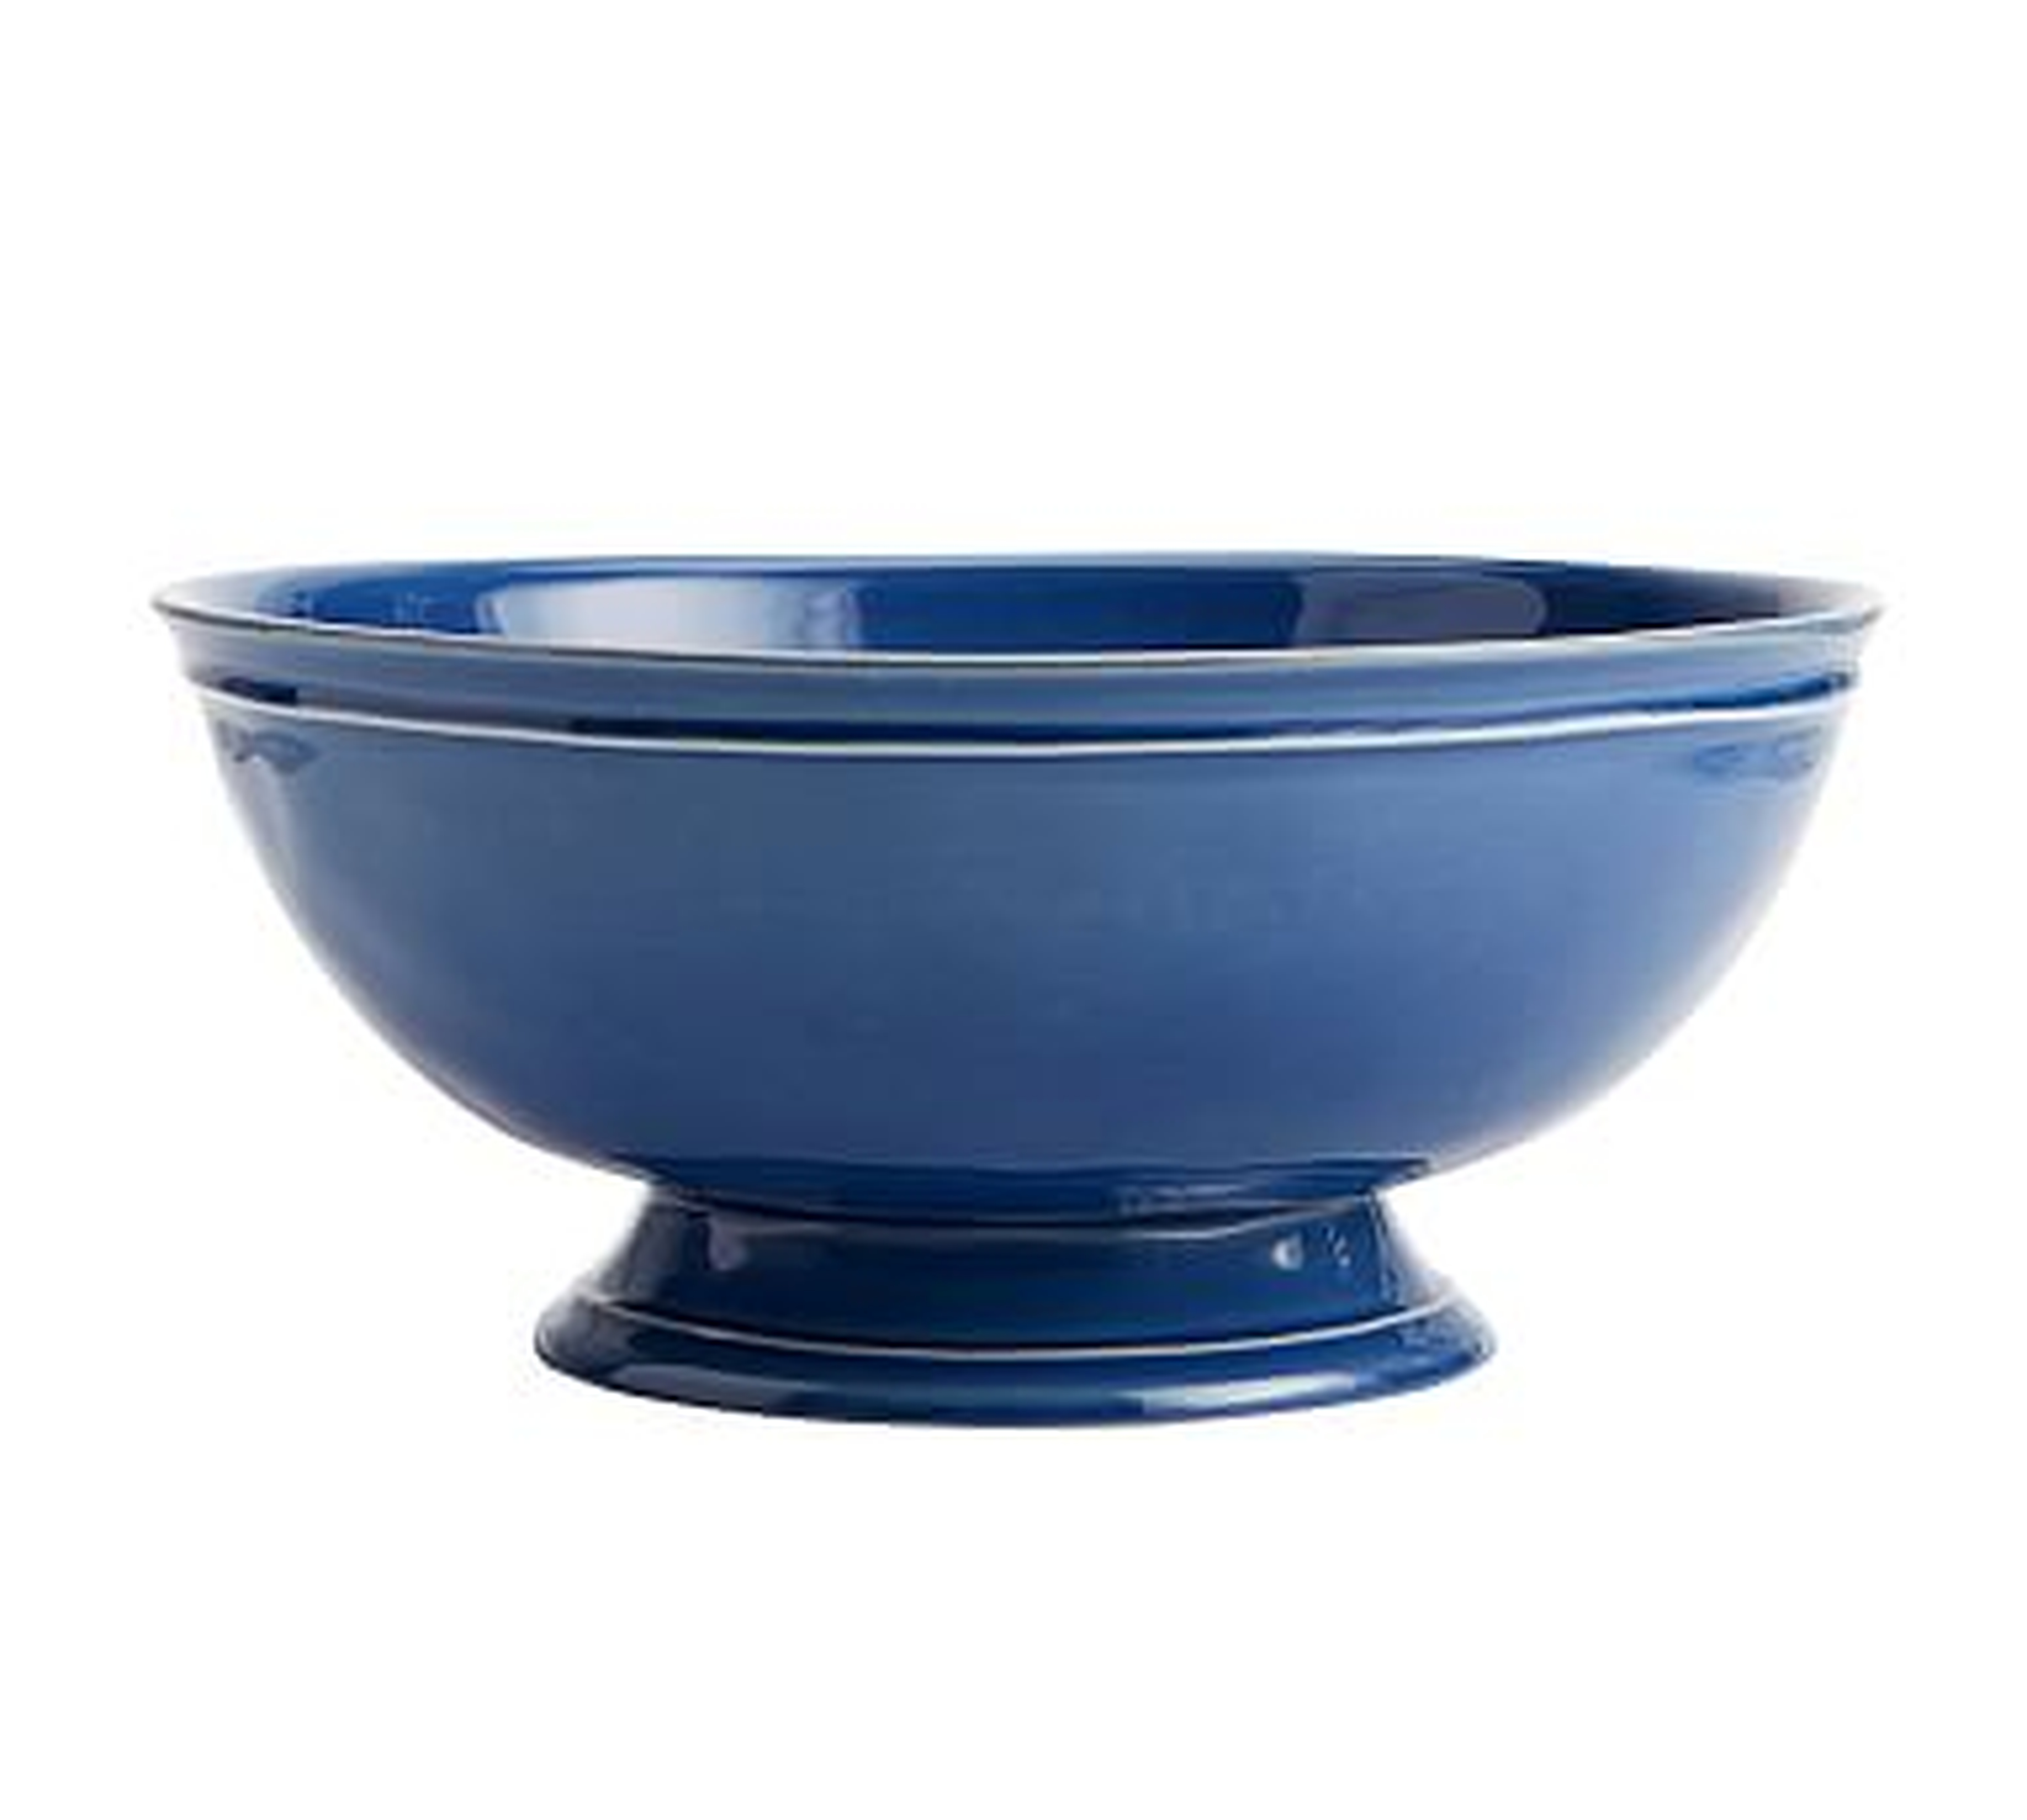 Cambria Stoneware Footed Serving Bowl, Large (12.5"dia. x 5.5"H) - Ocean Blue - Pottery Barn